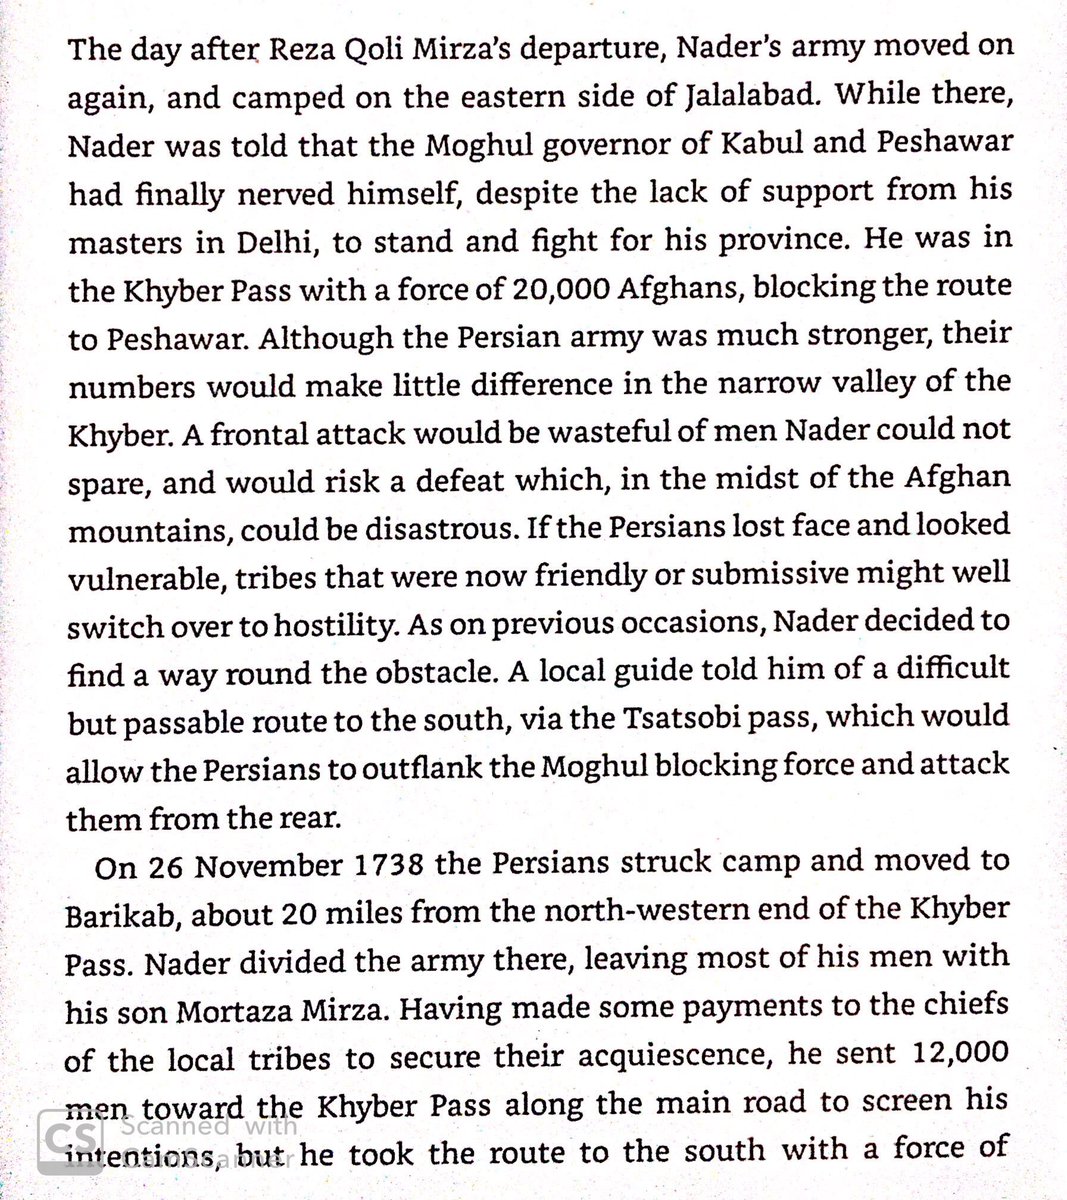 To invade India, Nader needed to cross the Khyber Pass. 20k Mughal troops blocked it, so Nader had a contingent of lightly armed men cross a difficult pass to the south in the dark. They defeated the Mughals, allowing the Persians to cross the mountains.